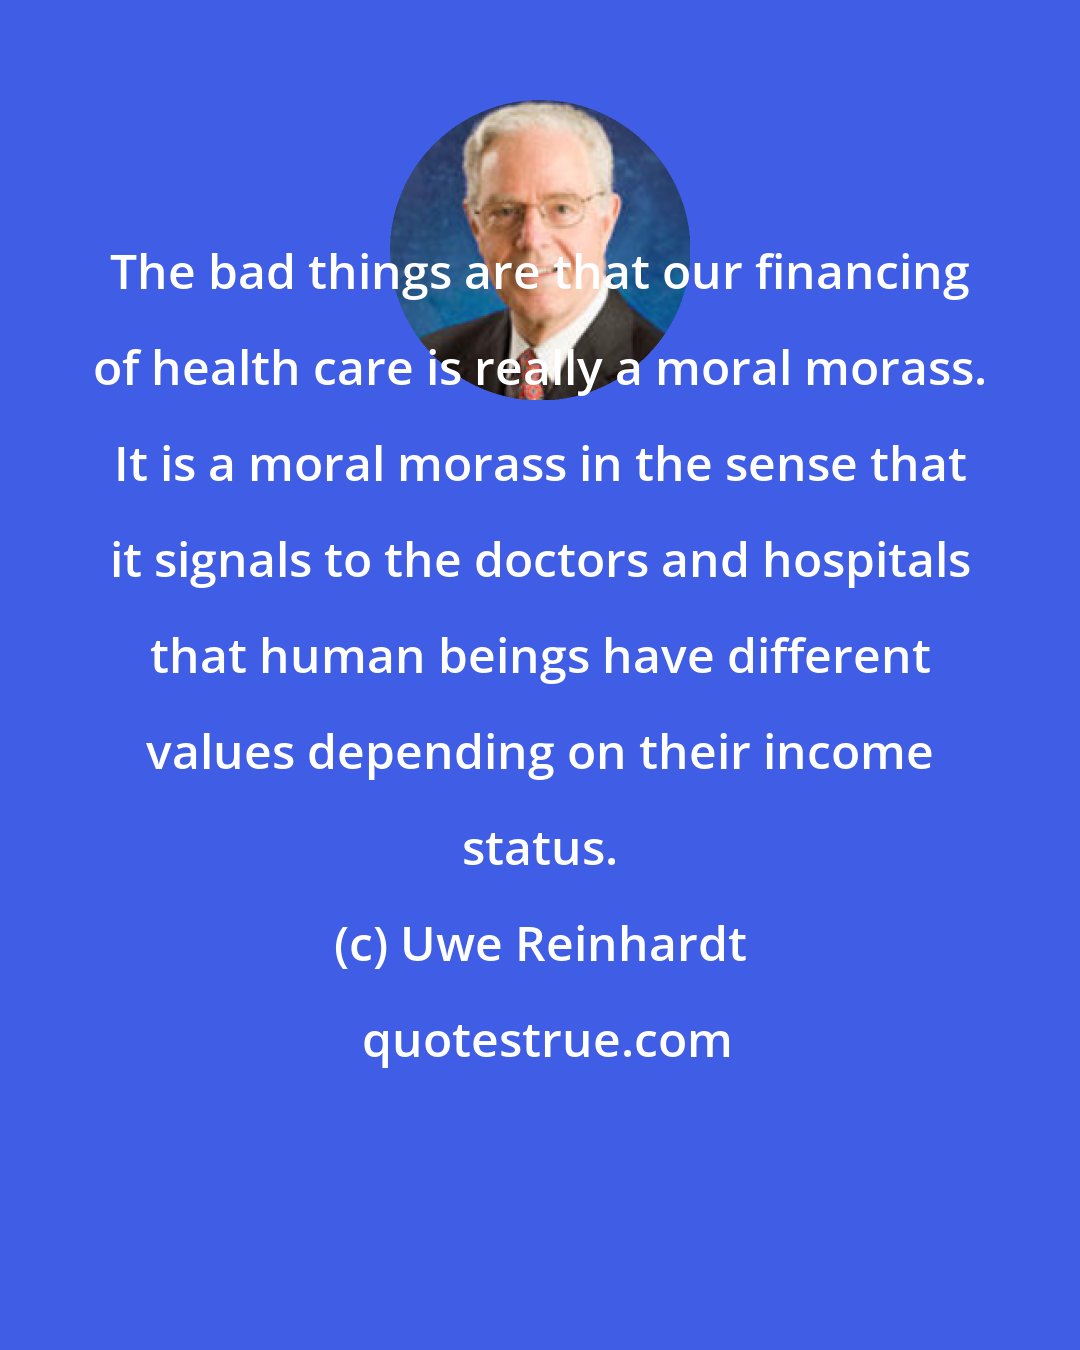 Uwe Reinhardt: The bad things are that our financing of health care is really a moral morass. It is a moral morass in the sense that it signals to the doctors and hospitals that human beings have different values depending on their income status.